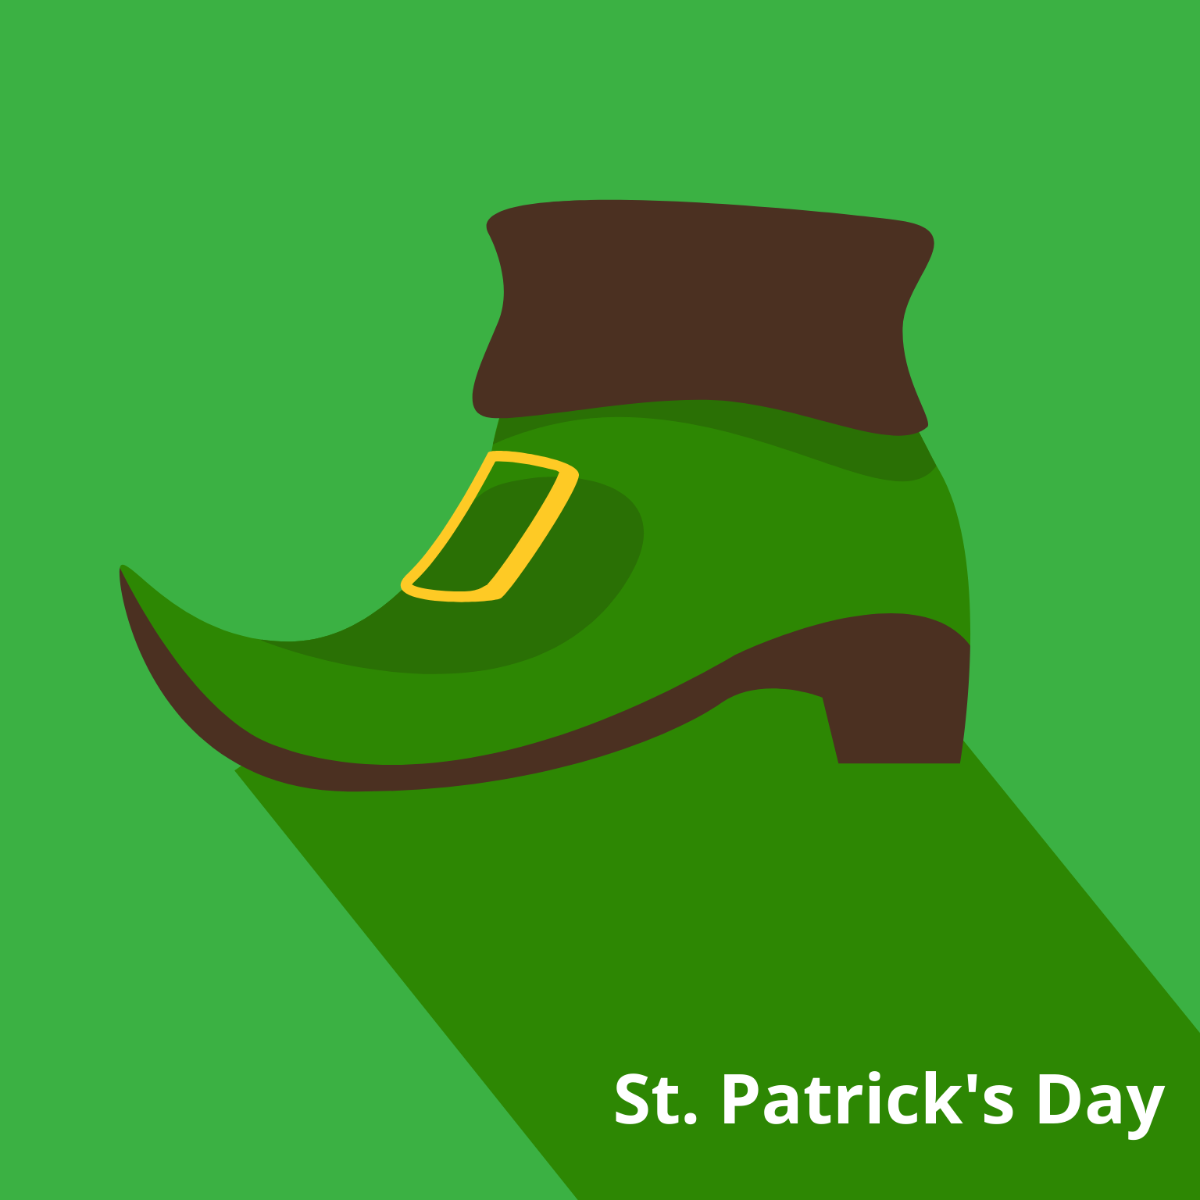 Free St. Patrick's Day Flat Design Vector Template